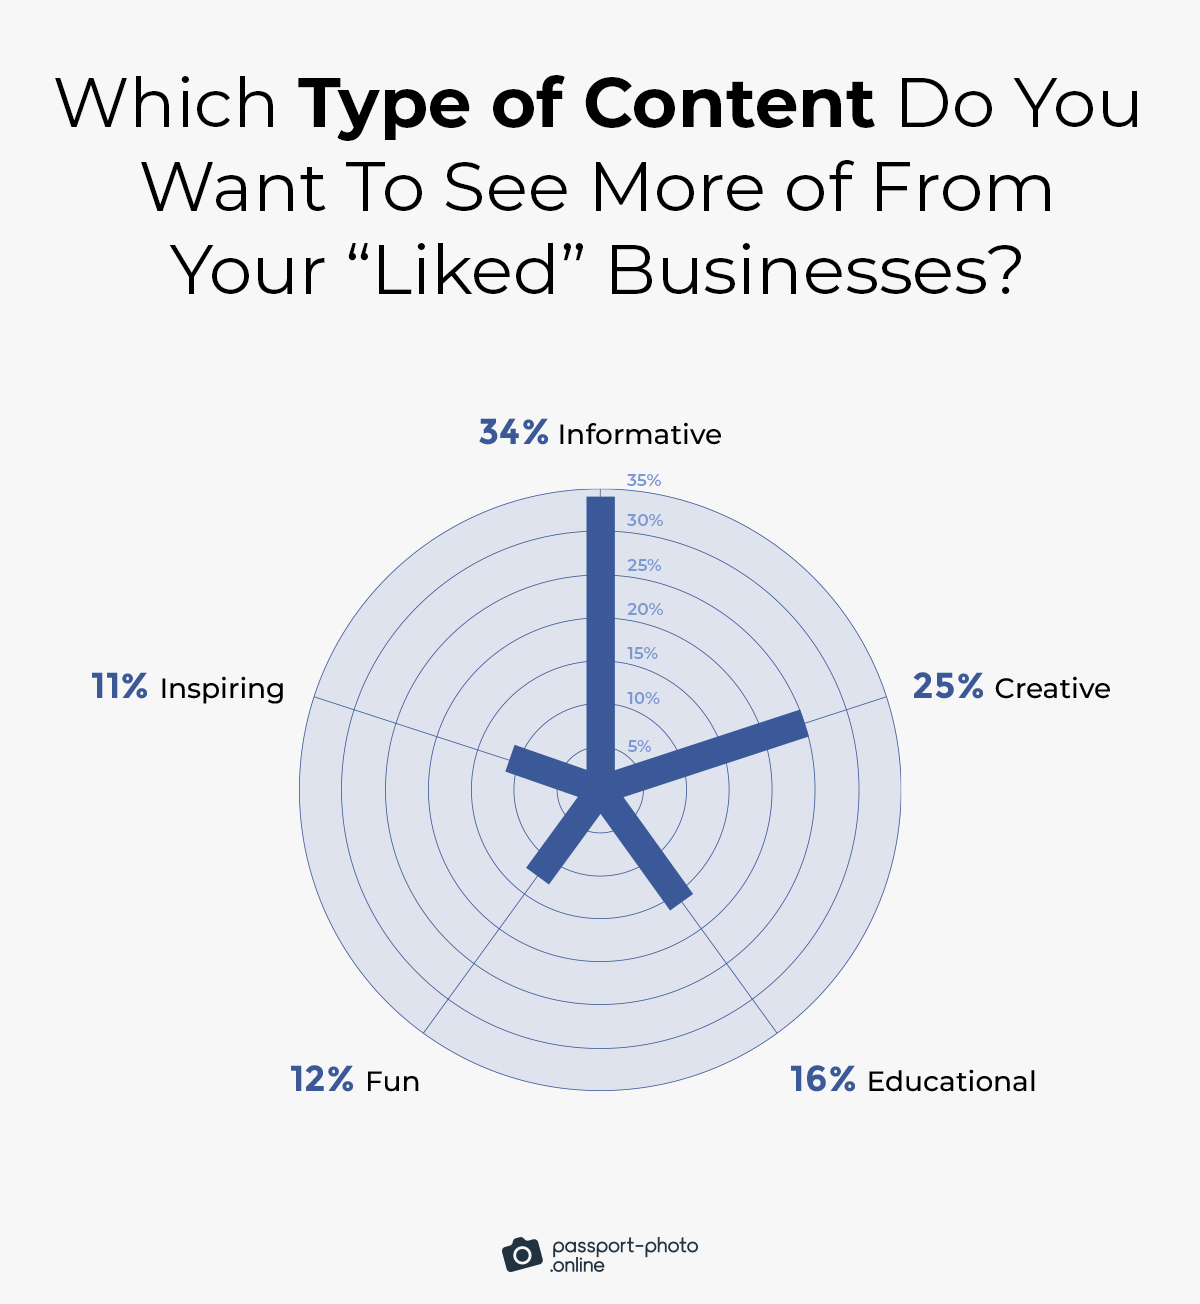 most people (34%) want to see more informative content from their subscribed businesses